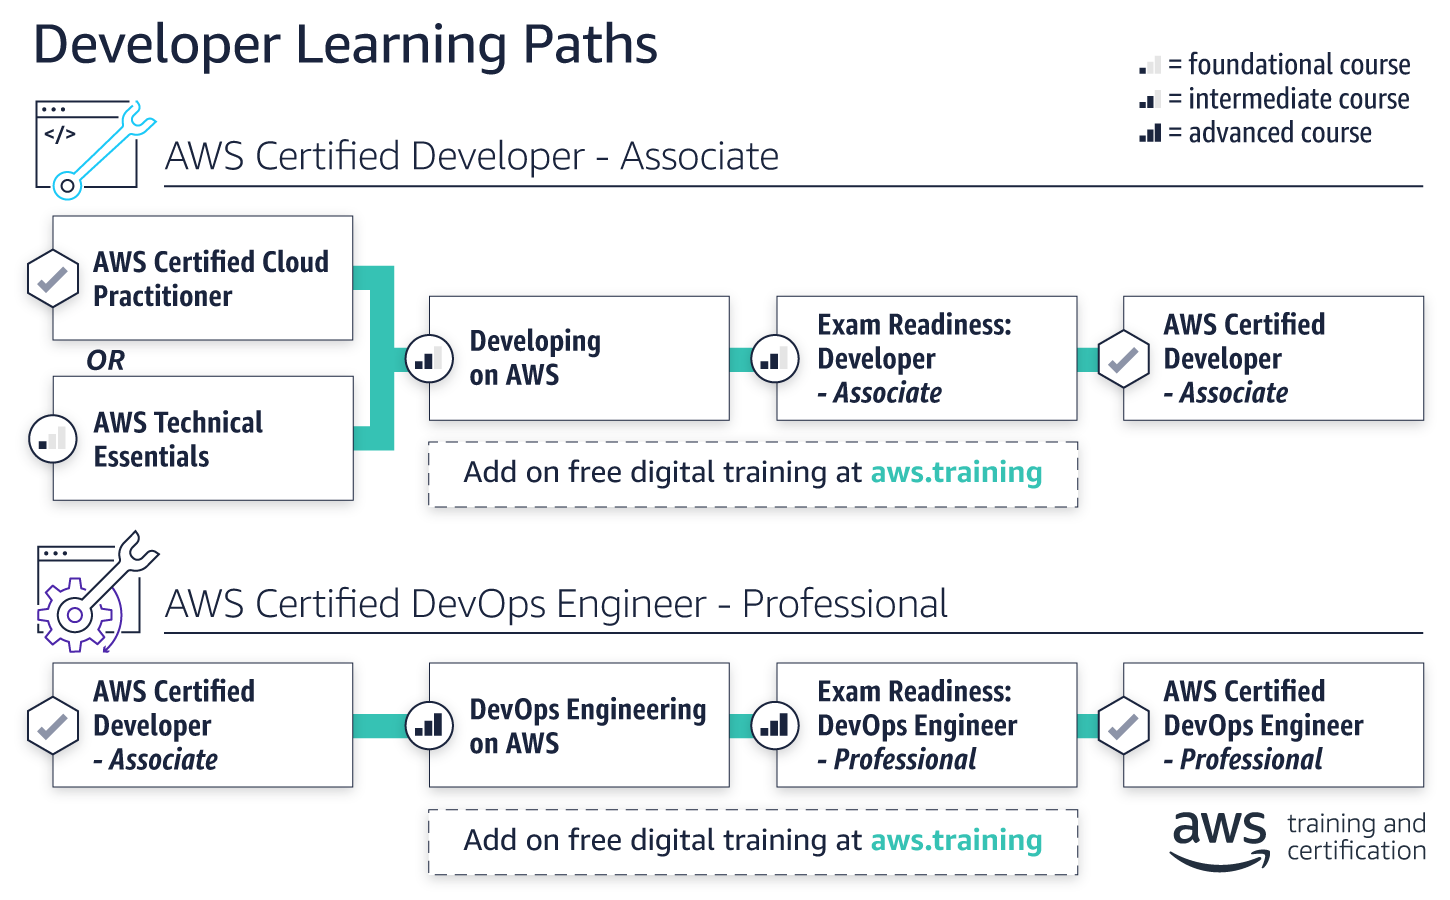 Certifications paths to become an AWS Certified Developer Associate or AWS Certified DevOps Engineer Professional